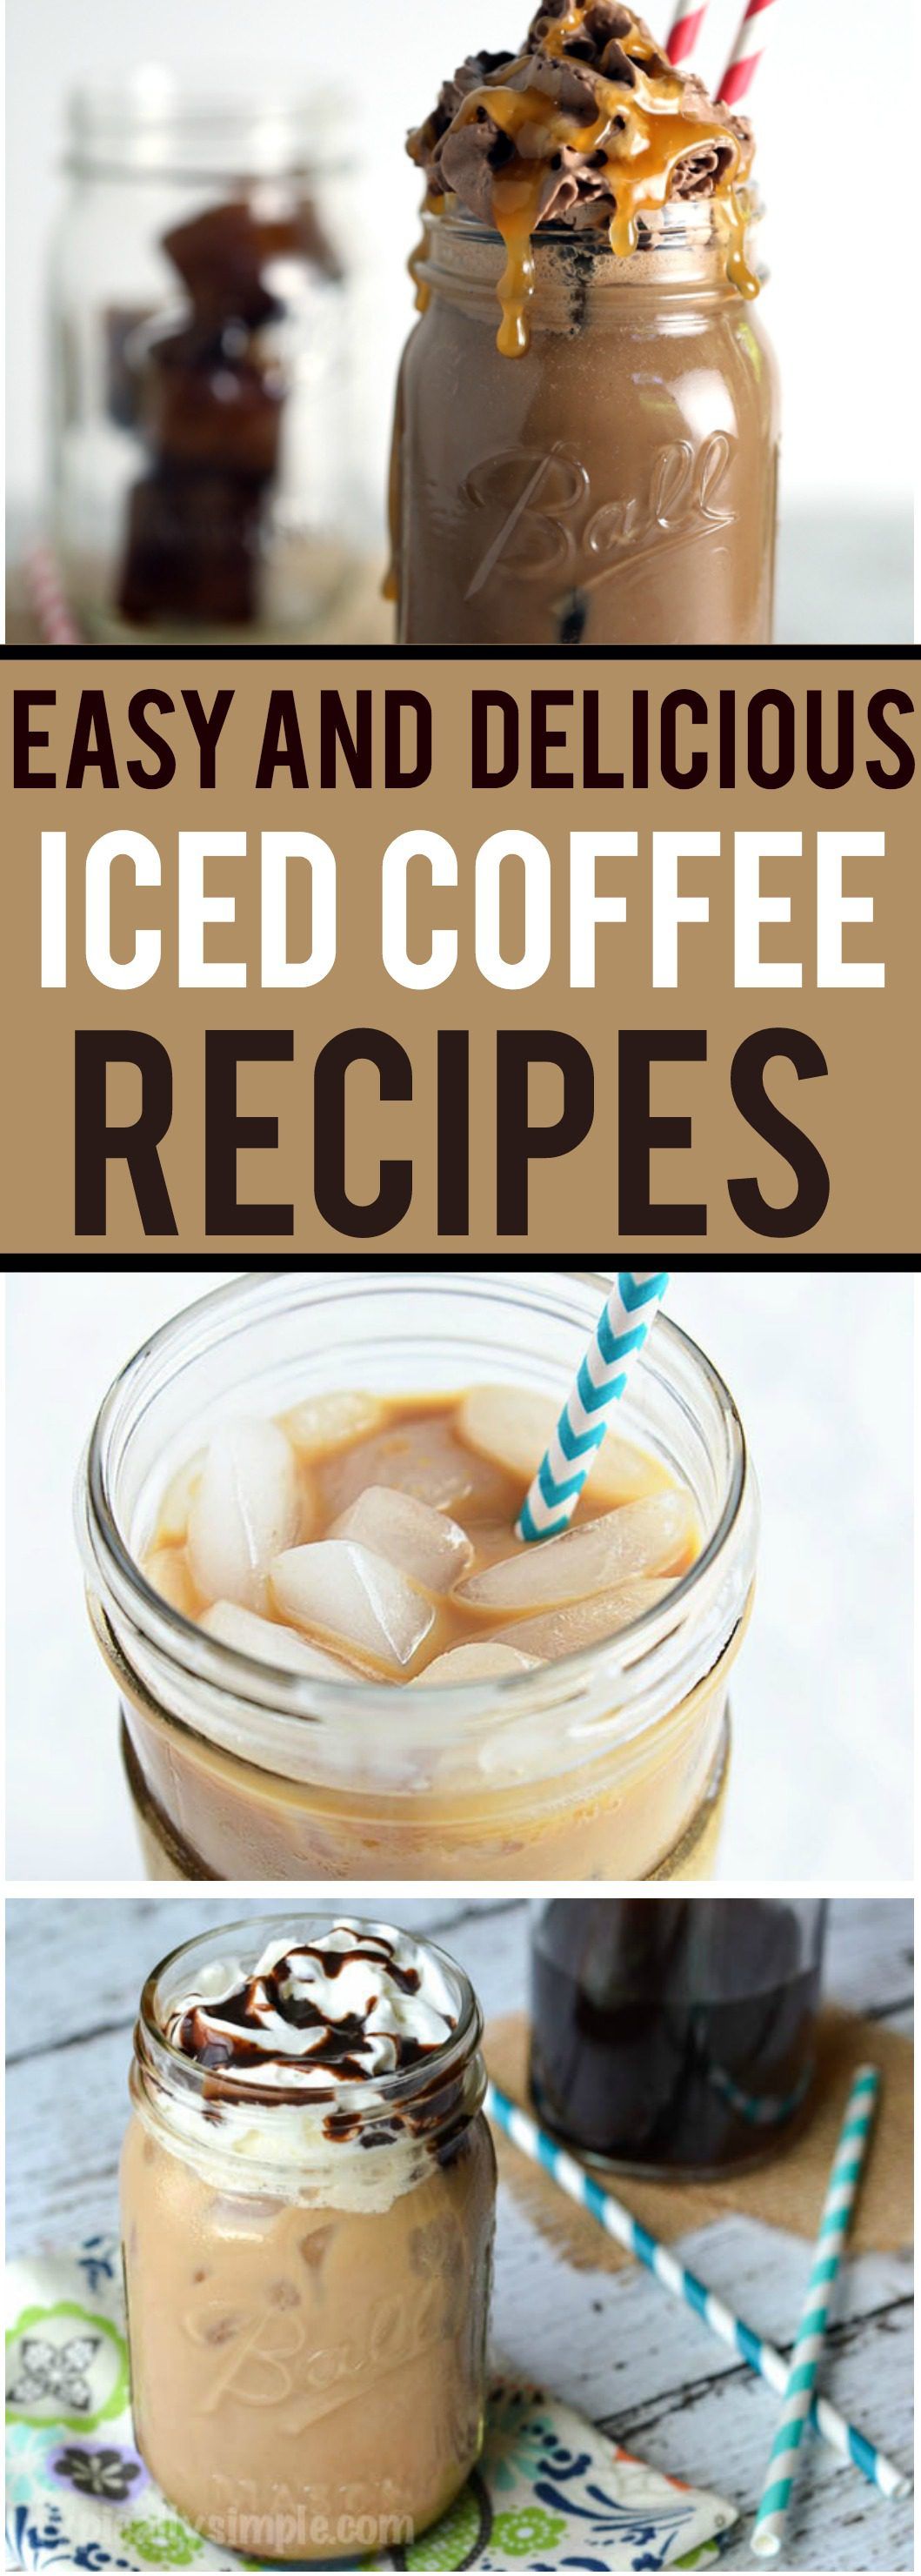 Iced Coffee Recipes are more fun to make yourself with your own mix of flavors.